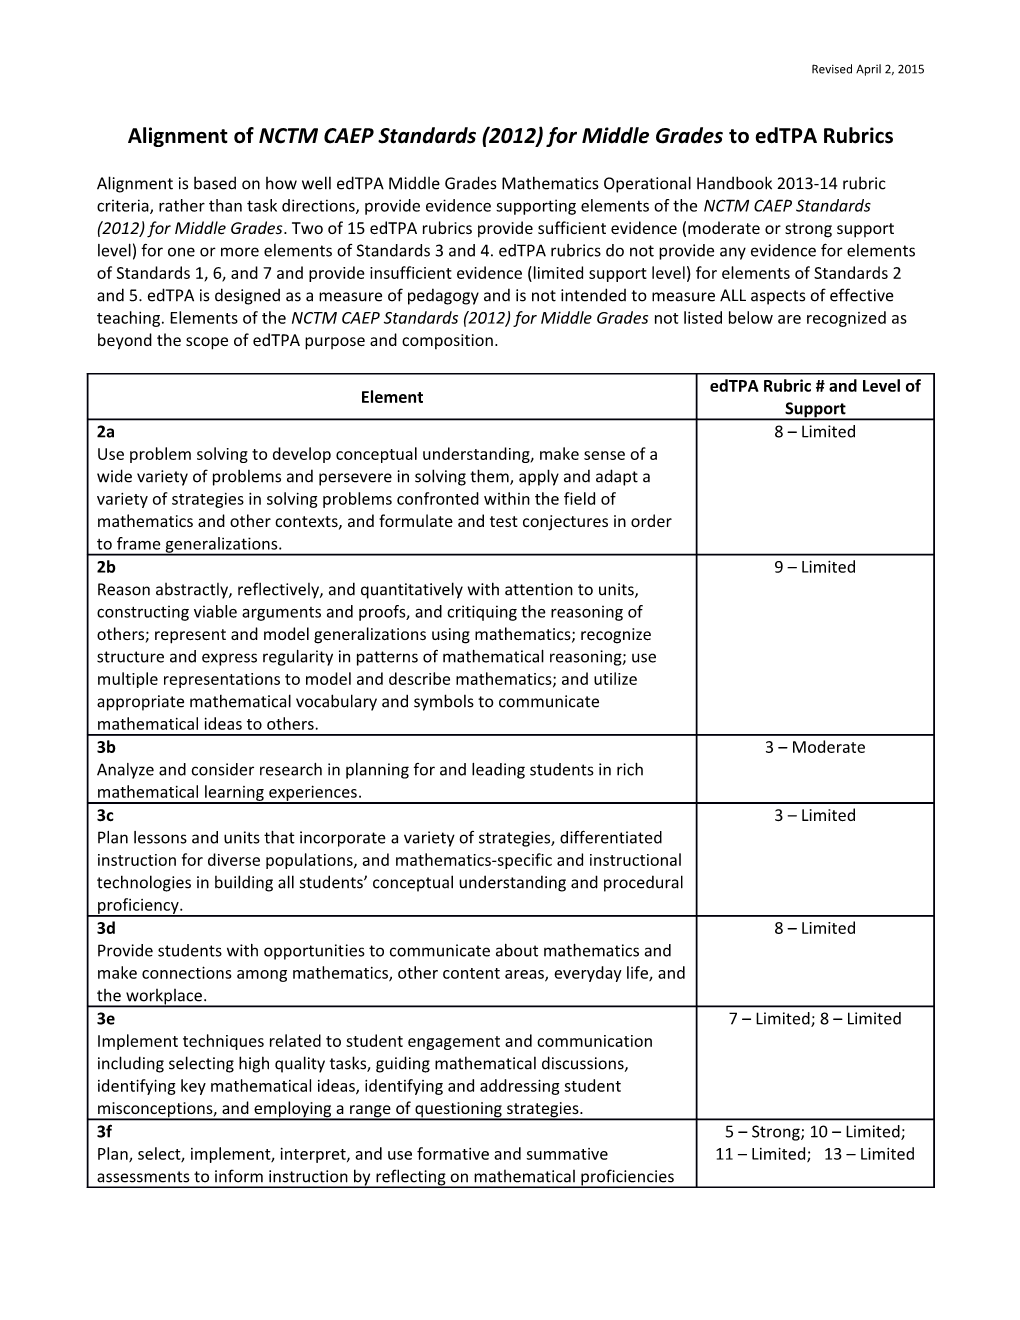 Alignment Ofnctm CAEP Standards (2012) for Middle Grades to Edtpa Rubrics